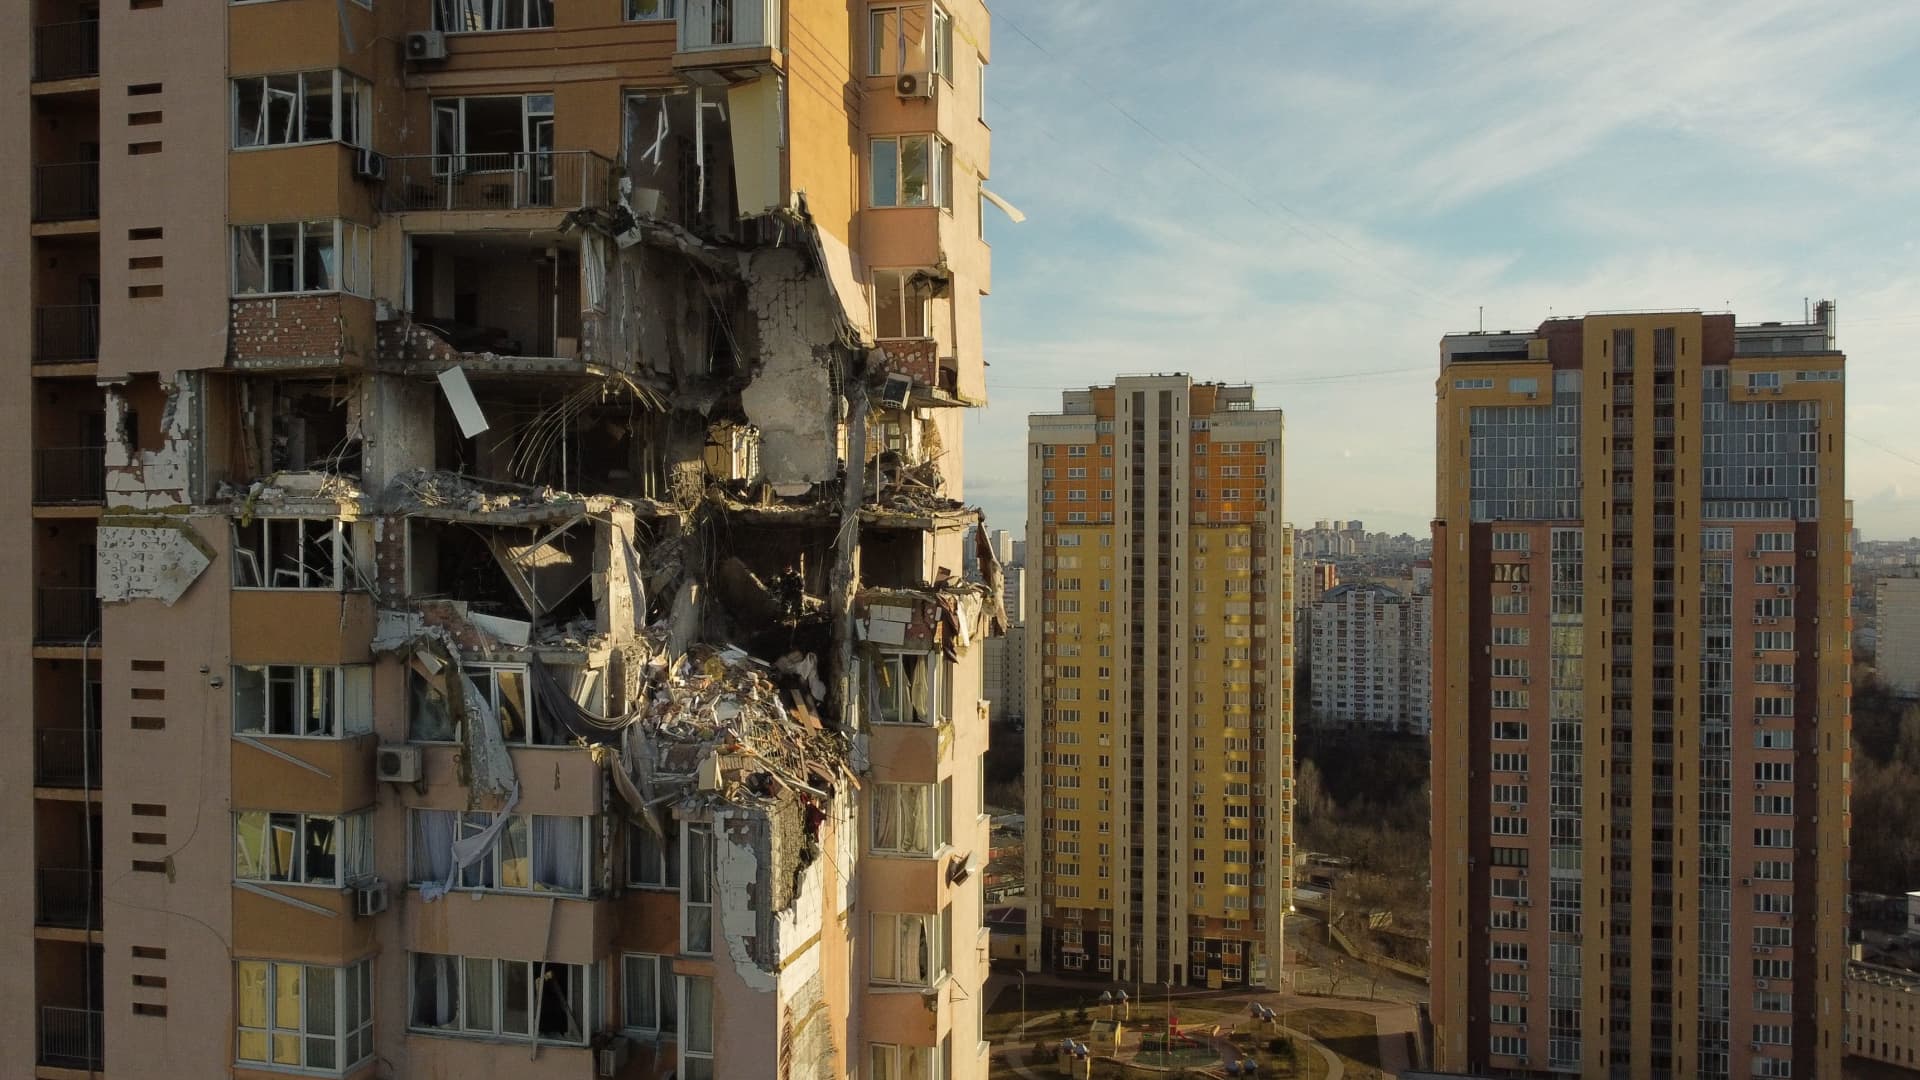 This general view shows damage to the upper floors of a building in Kyiv on February 26, 2022, after it was reportedly struck by a Russian rocket.